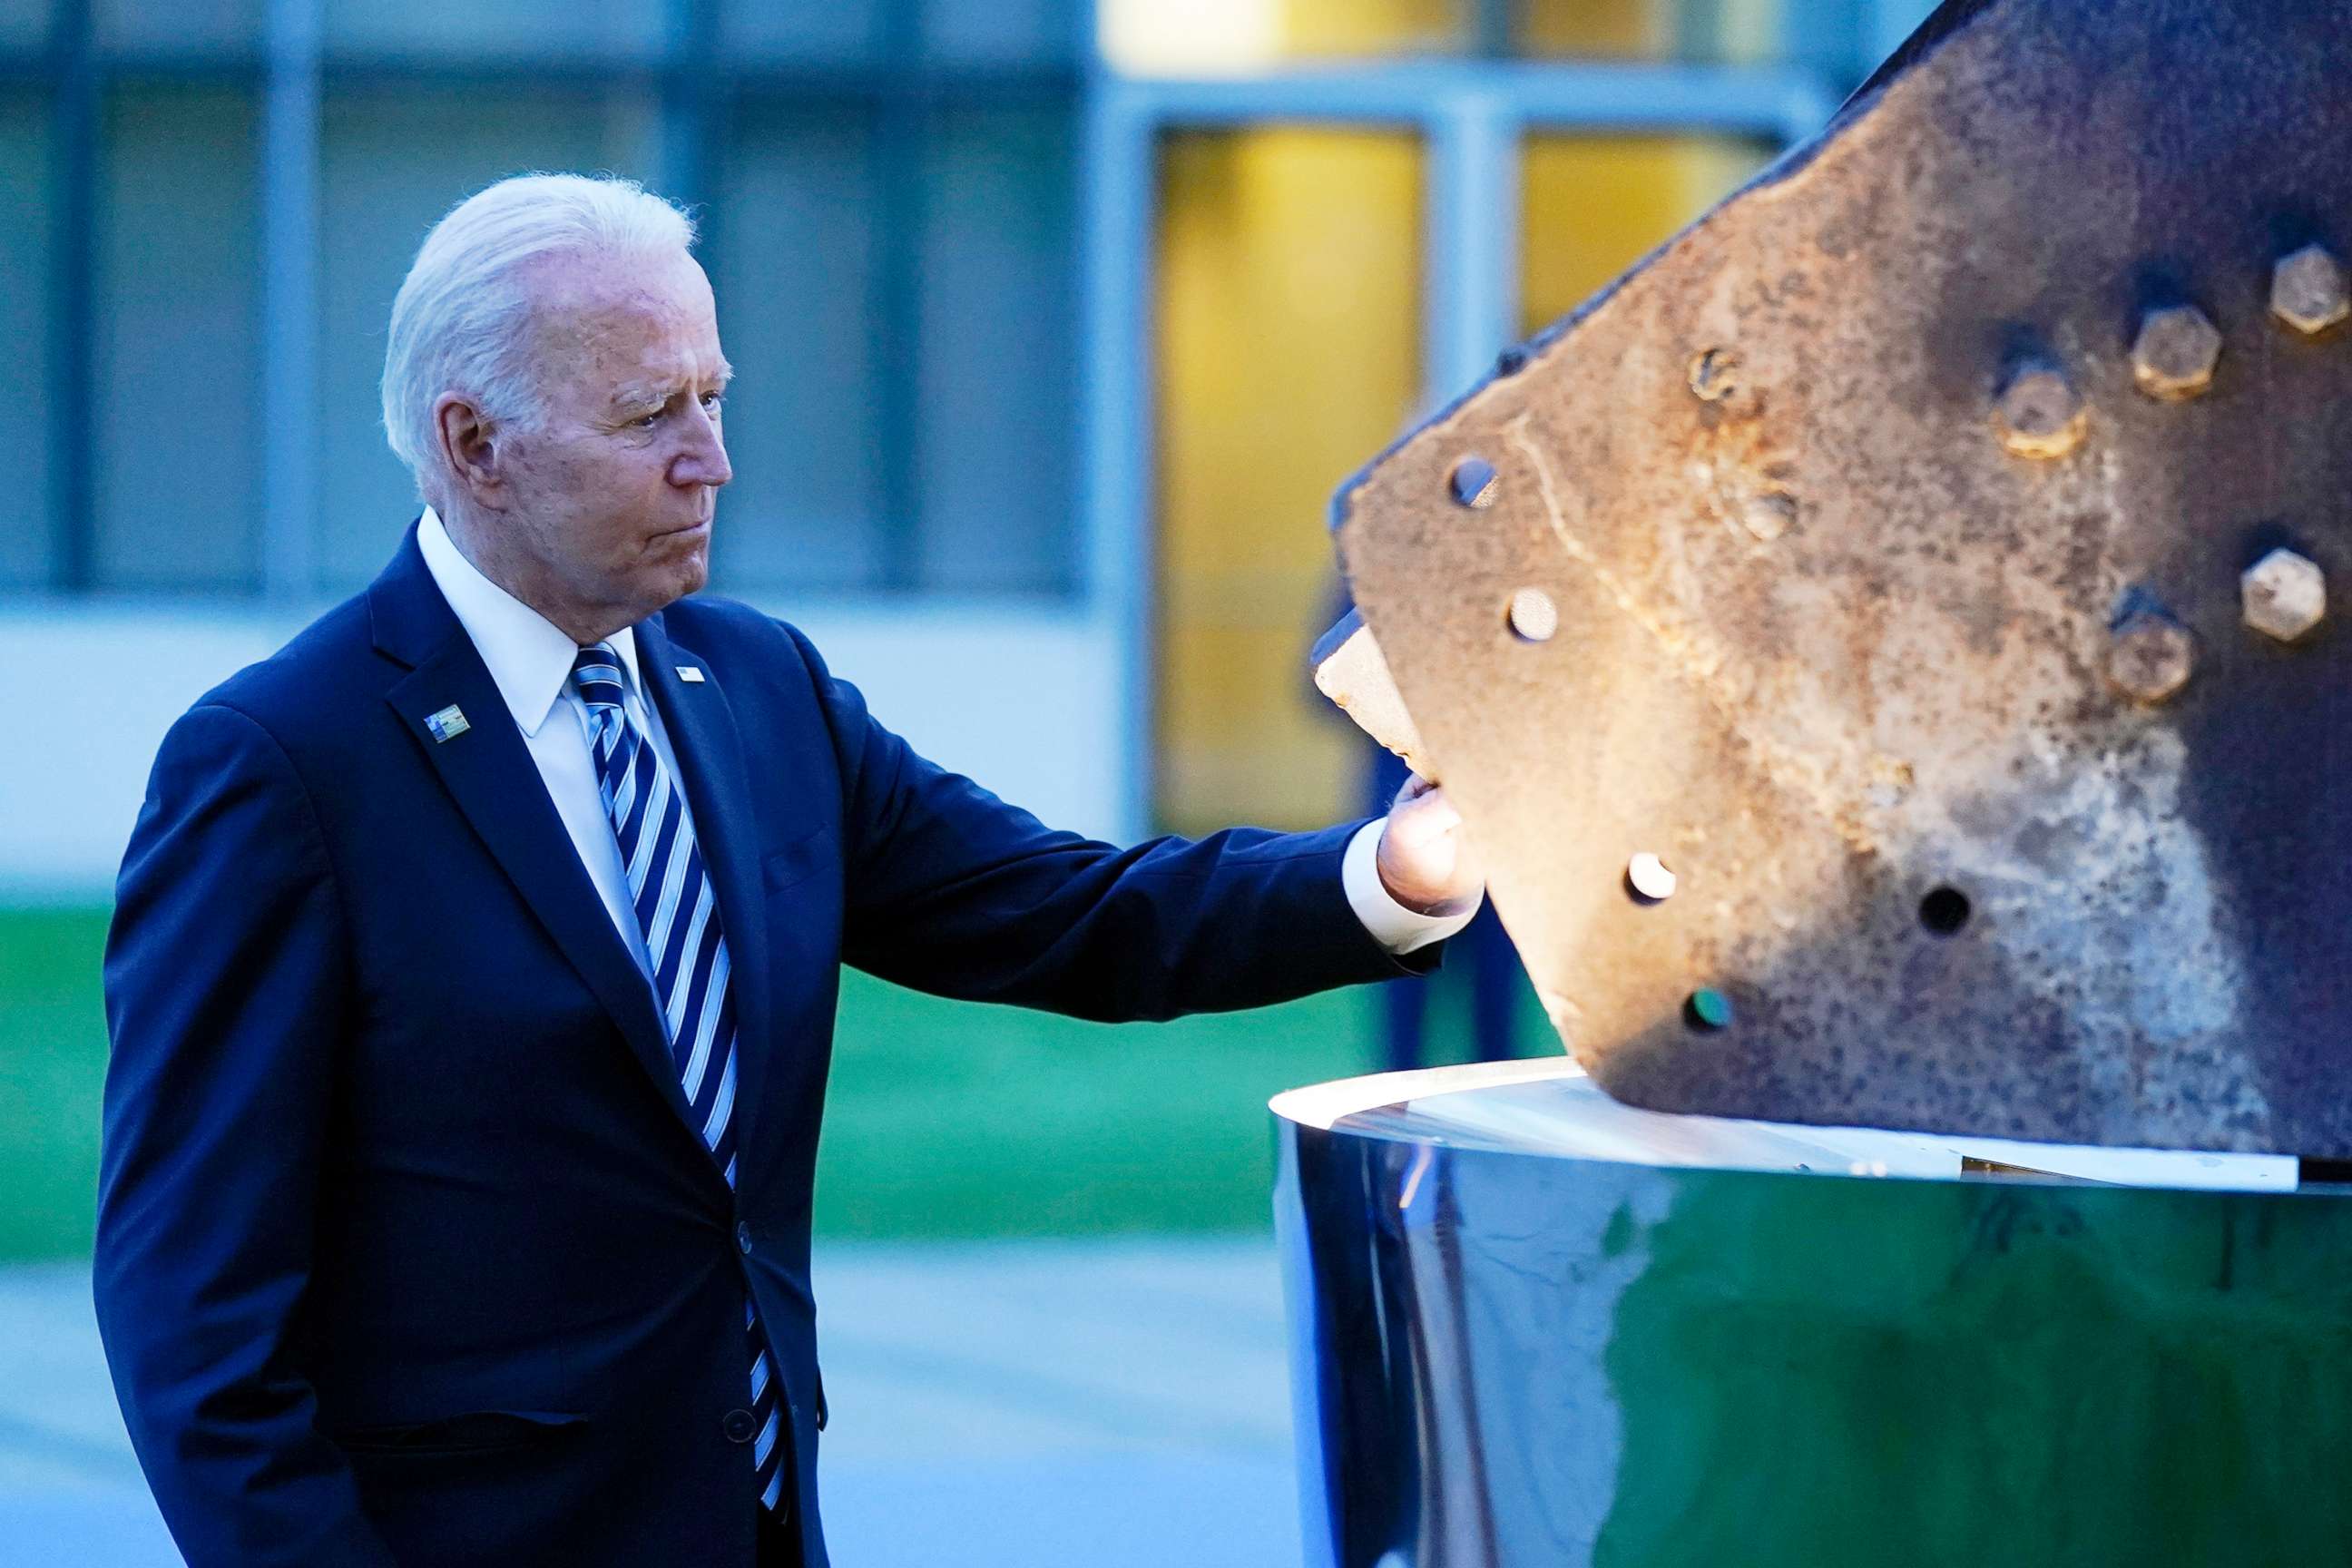 PHOTO: President Joe Biden touches a piece of steel from the North Tower of the World Trade Center while visiting a memorial to the September 11 terrorist attacks at NATO headquarters in Brussels, June 14, 2021.